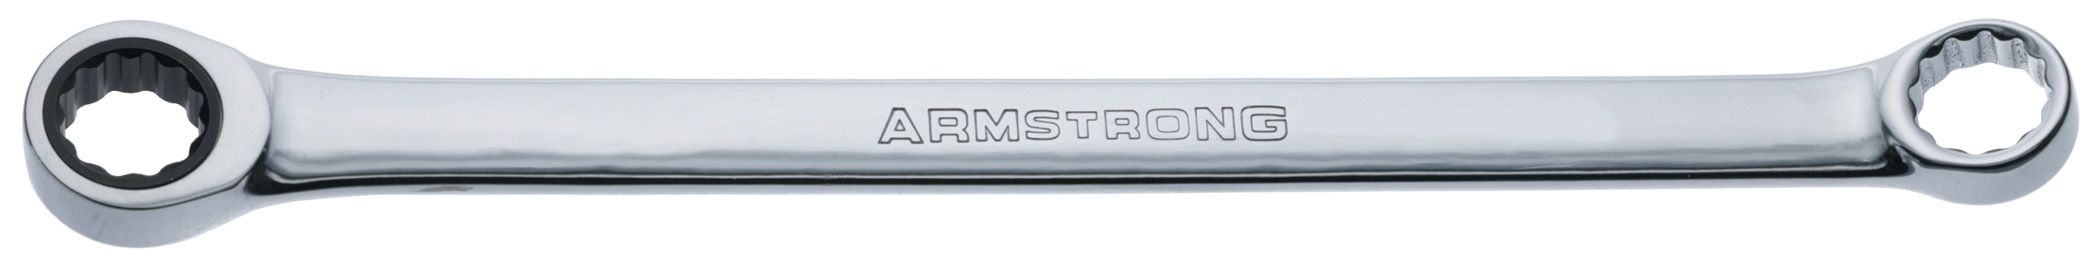 Armstrong 1/2 in. Box Ratcheting Wrench